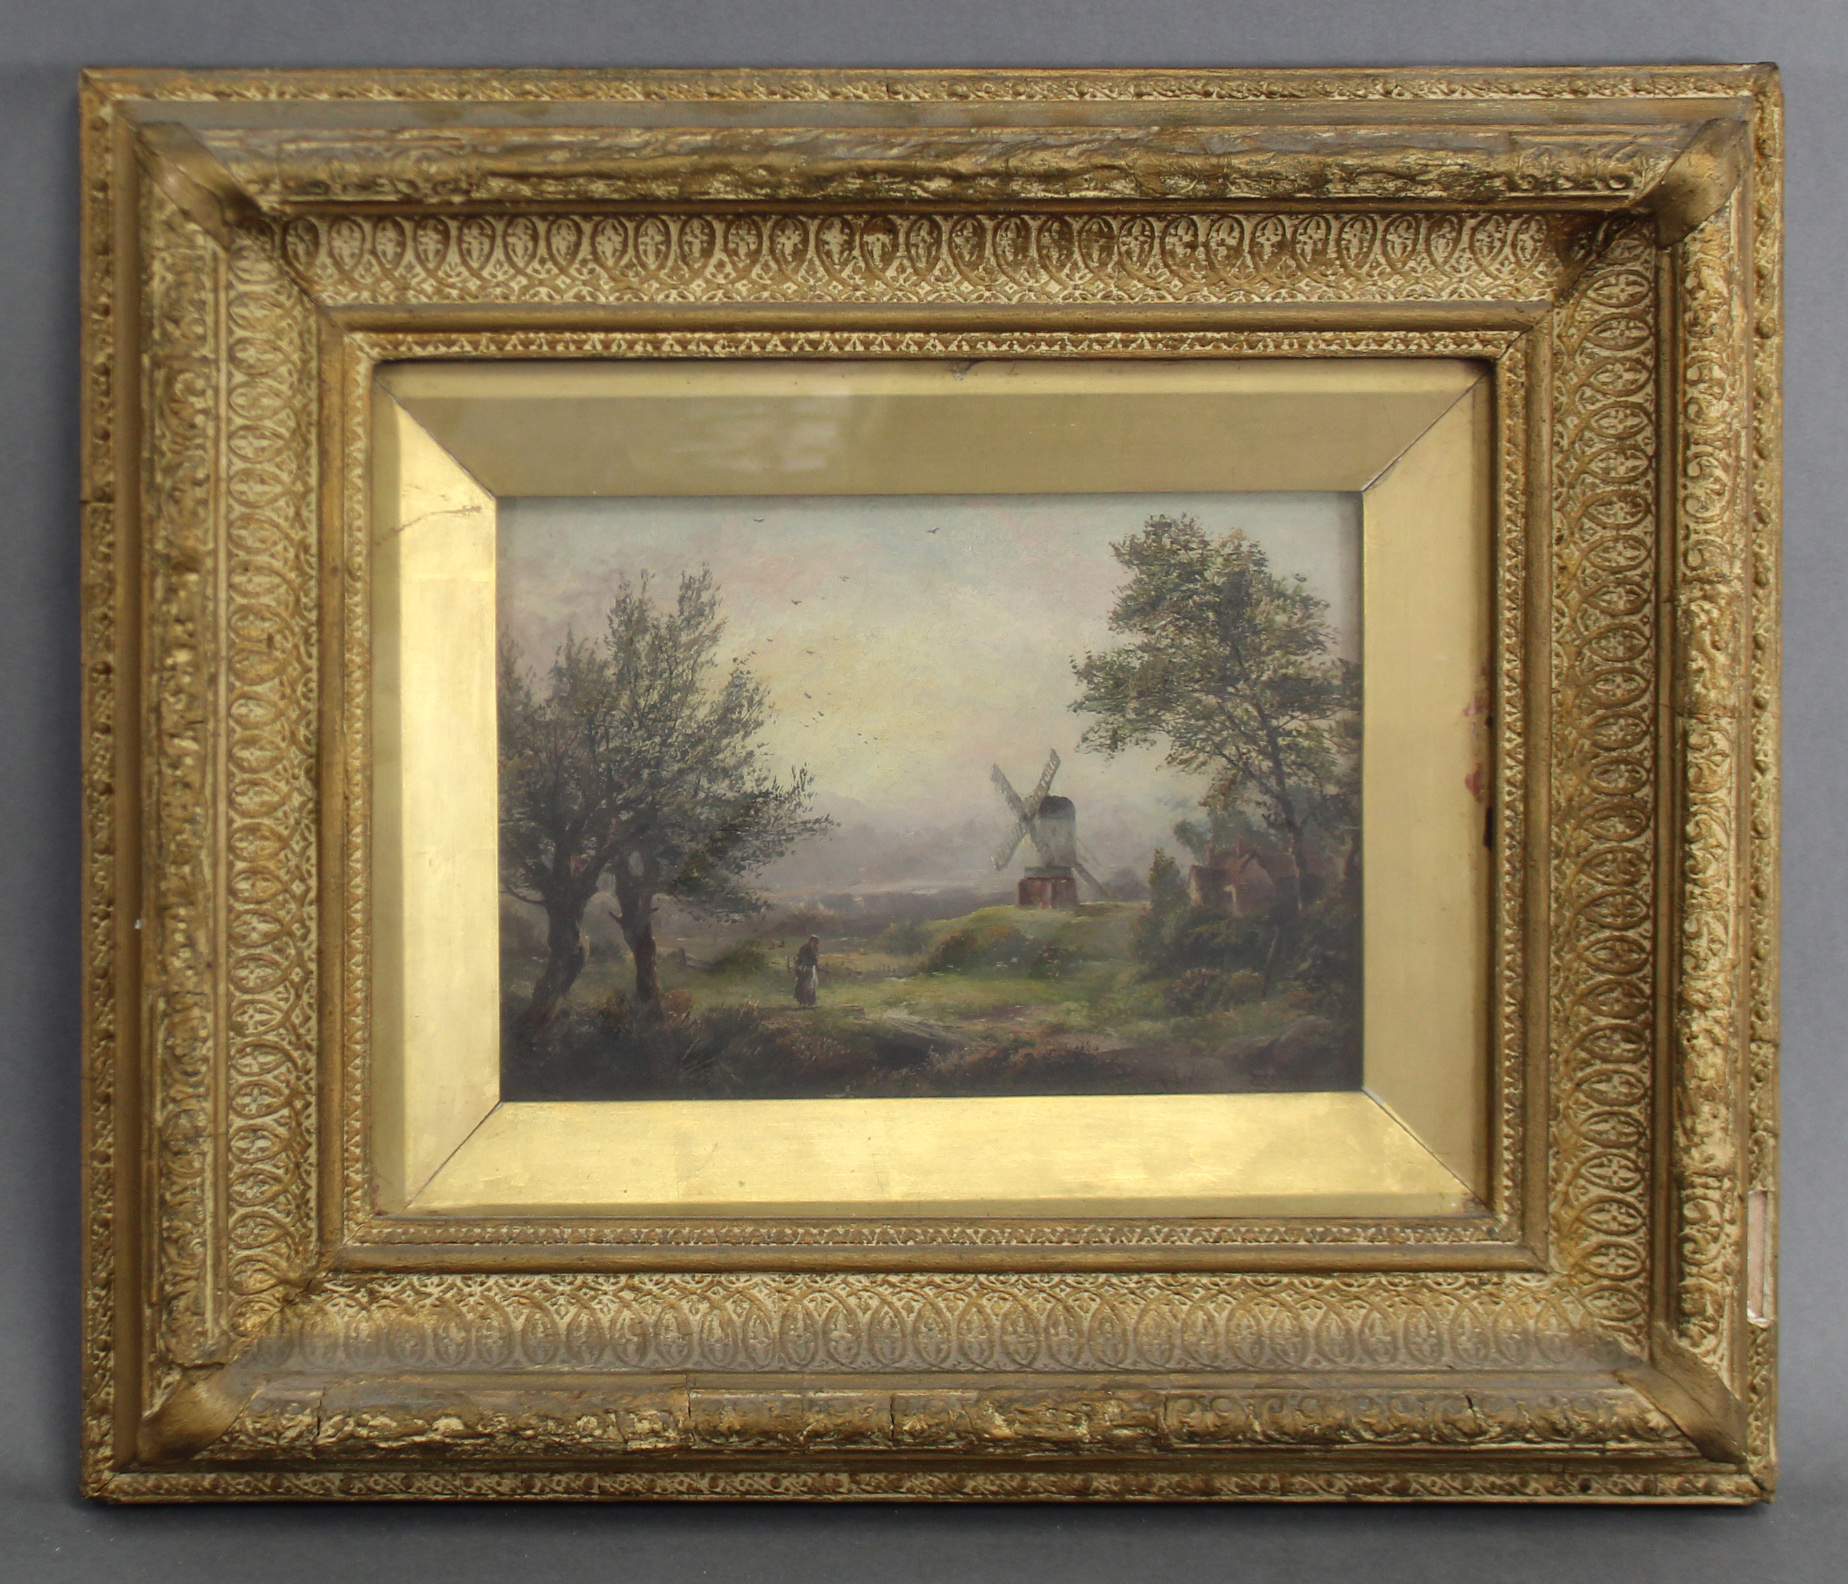 WILLIAM STANLEY (Nottingham, mid-19th century). A rural landscape with trees & a figure crossing a - Image 3 of 4